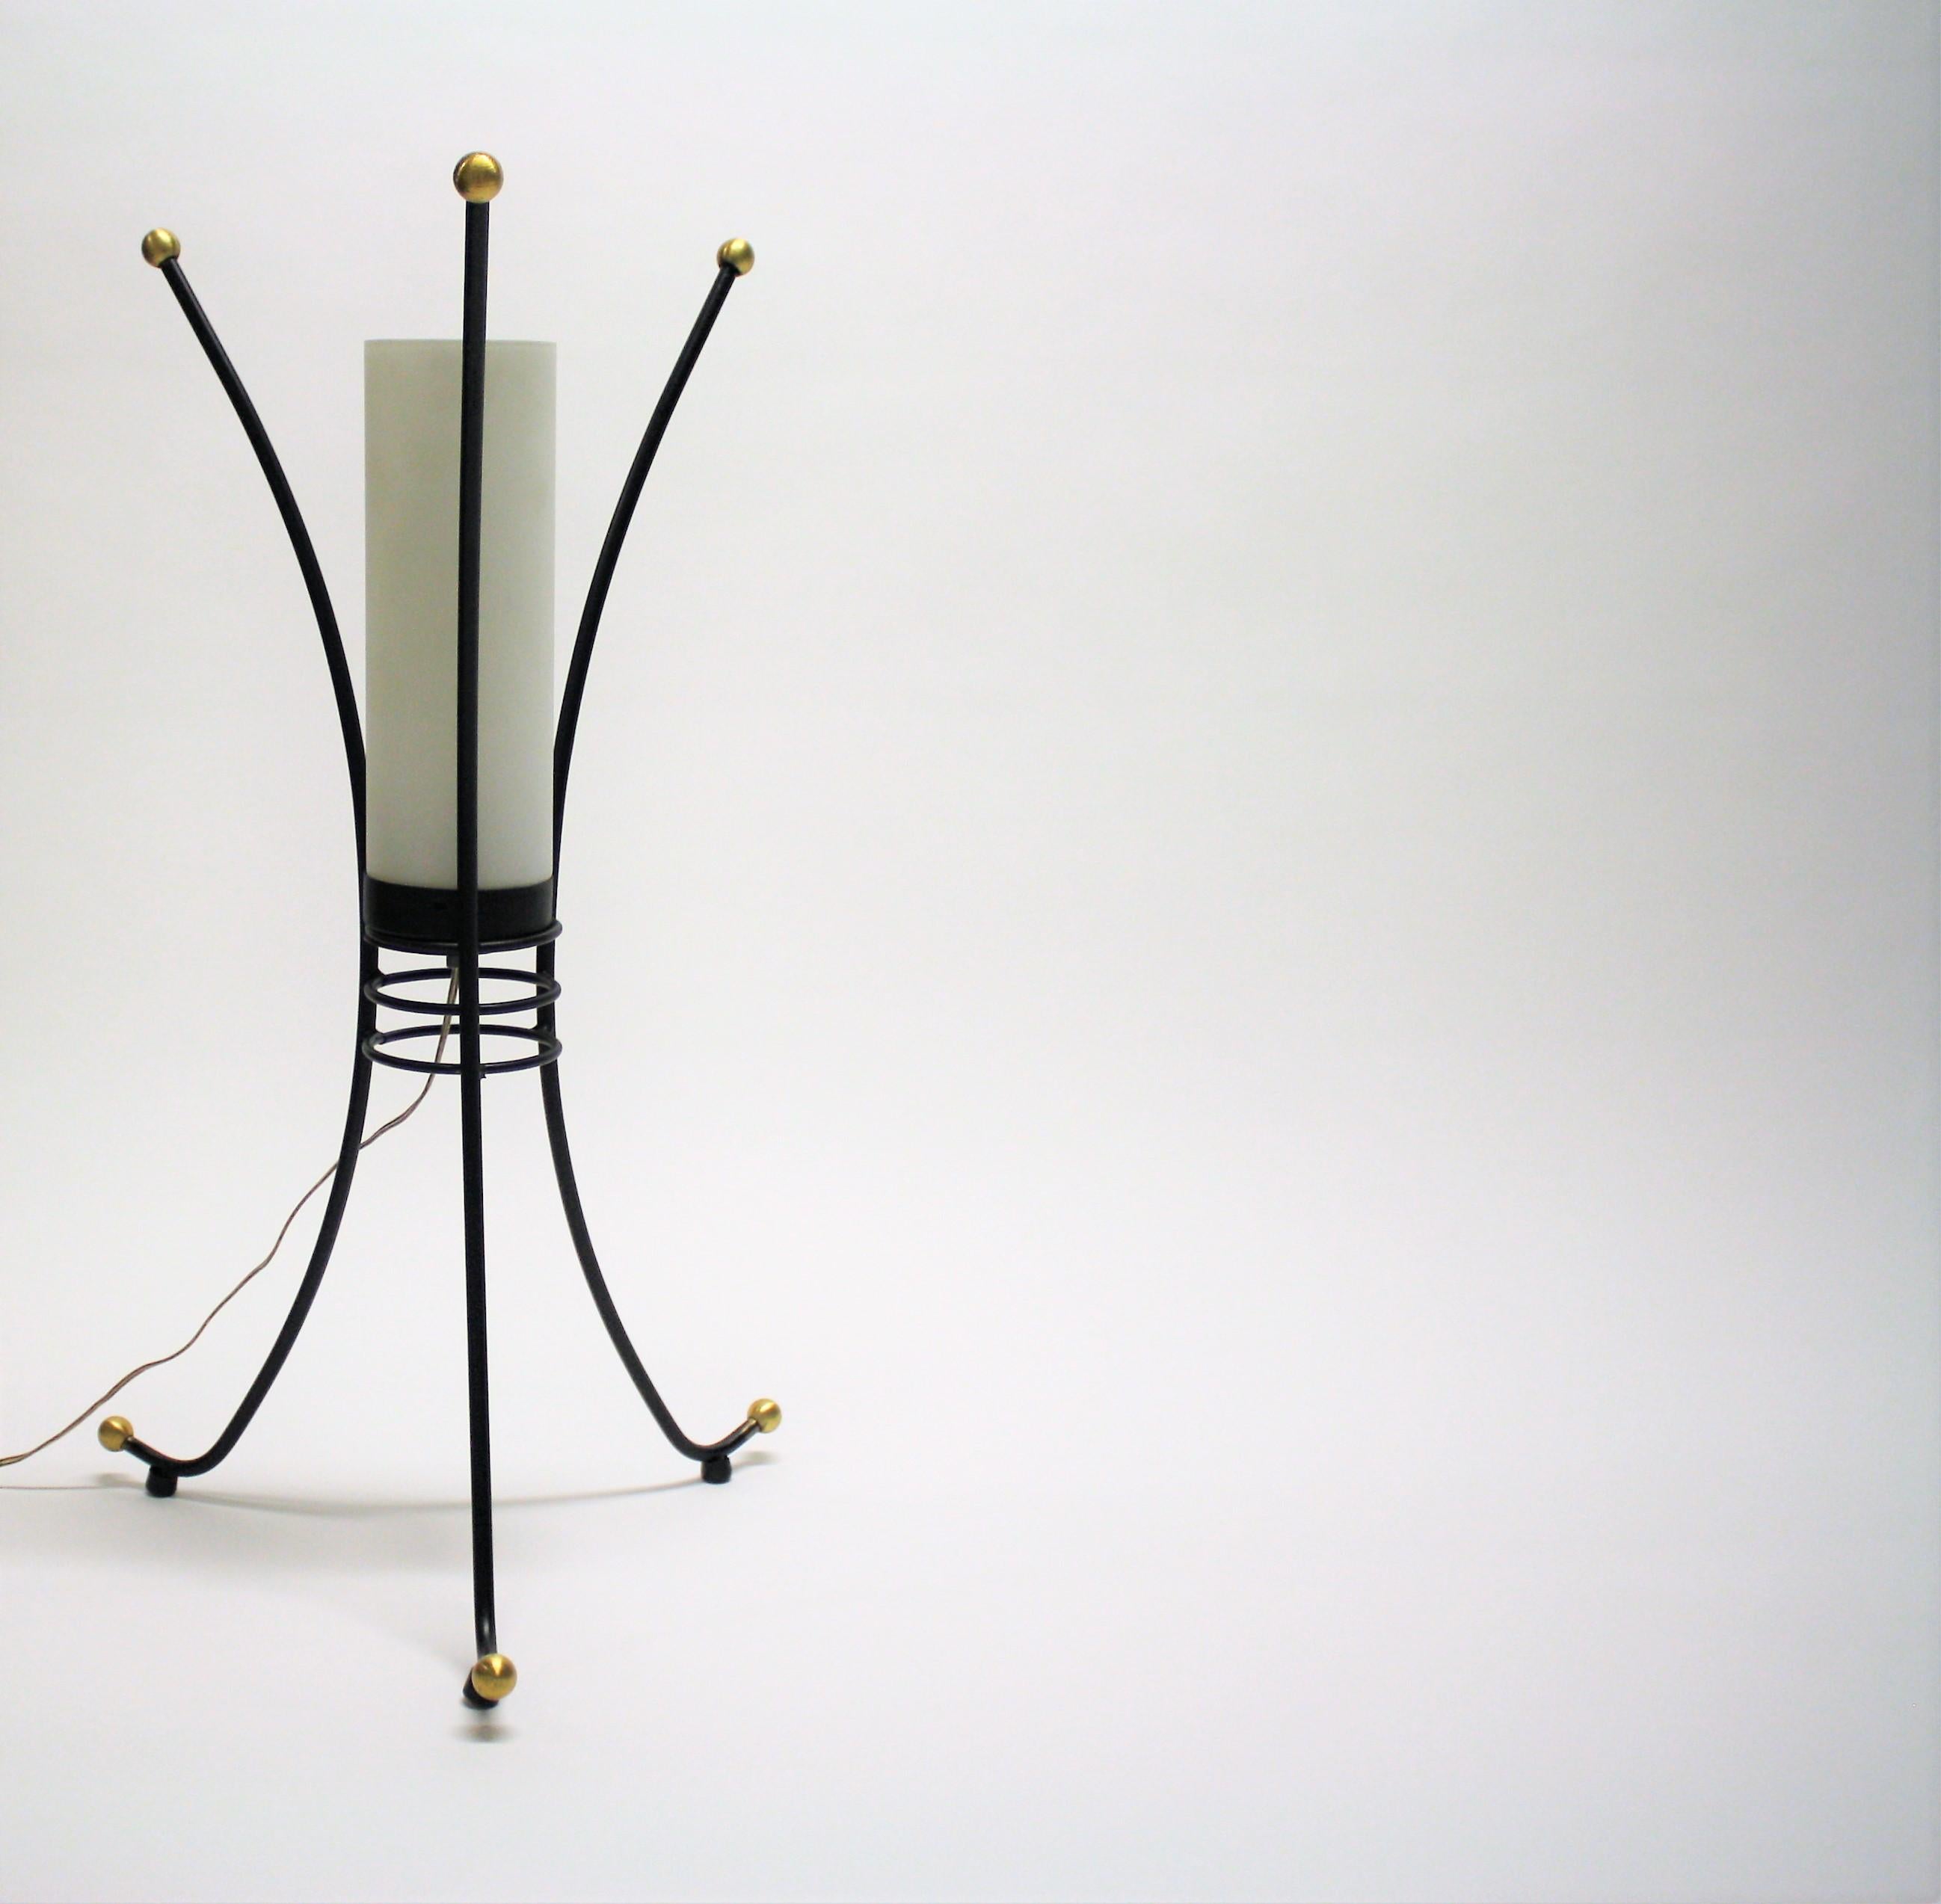 Charming tripod design mid century table lamp with a milk glass lamp shade.

The lamp has golden feet and tops.

Designer unknown.

The lamp can be used as a small floor lamp or as a large table lamp.

It emits a warm and welcoming